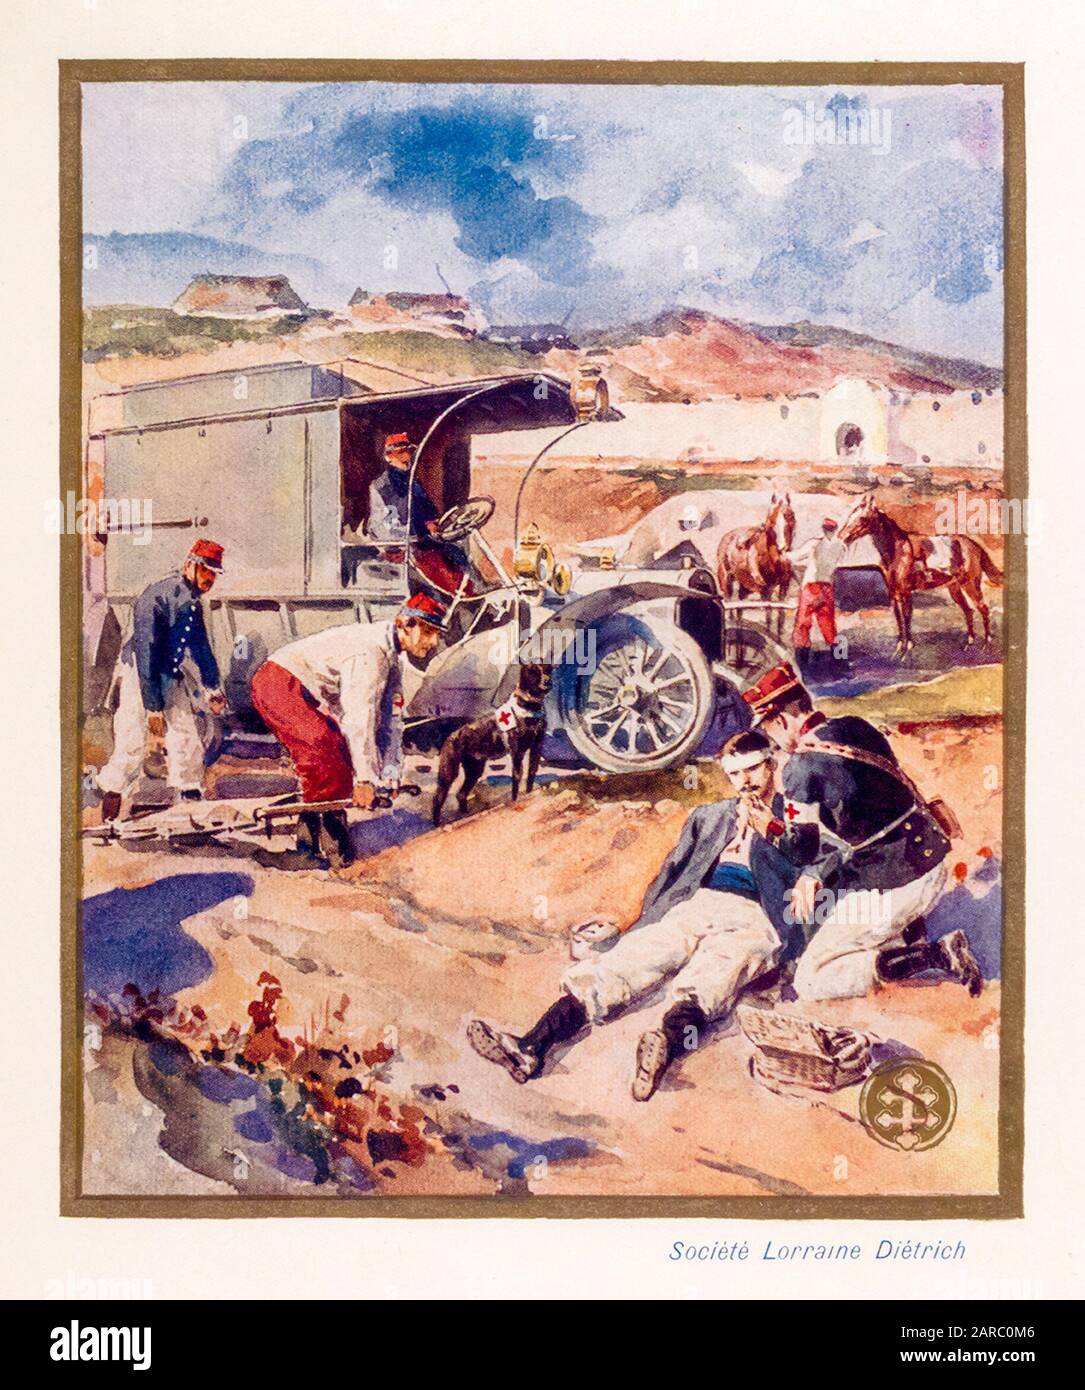 Lorraine Diétrich Automobiles used as an Ambulance during the war, promotional illustration 1909 Stock Photo